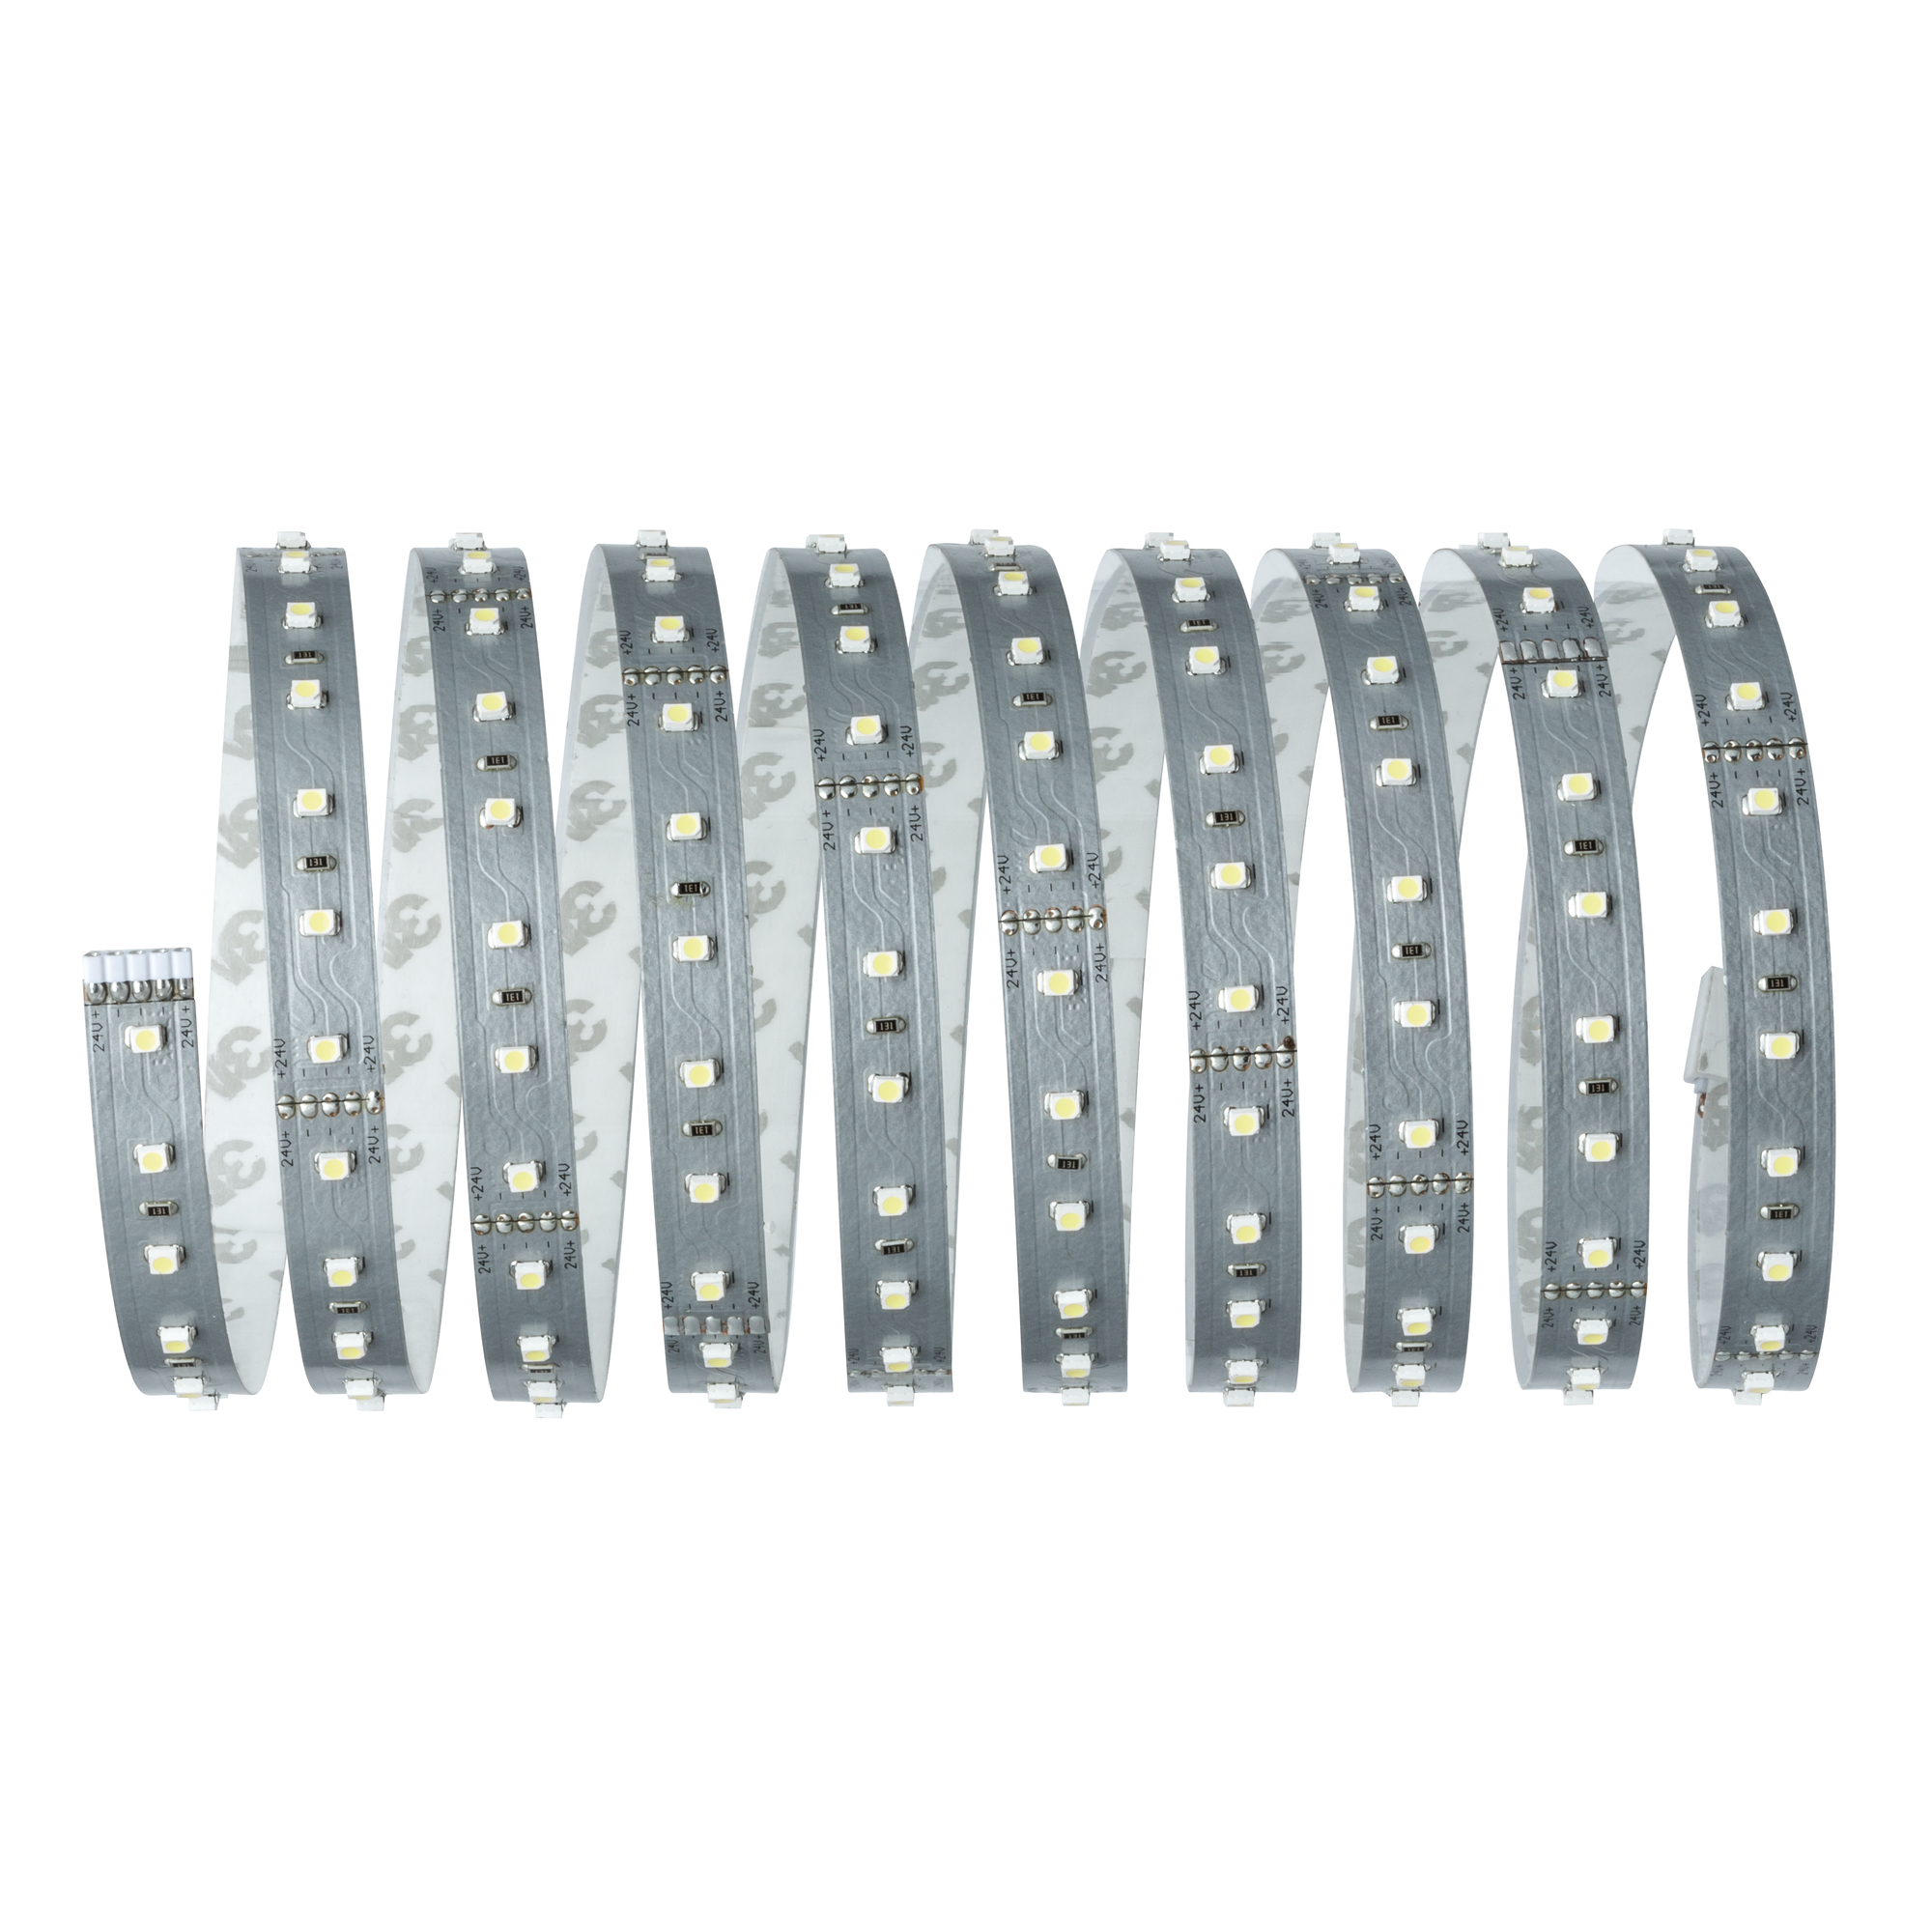 Function MaxLED 500 Basisset 3m Tageslichtweiß 17 W 230/24 V 36 VA Silber + product picture